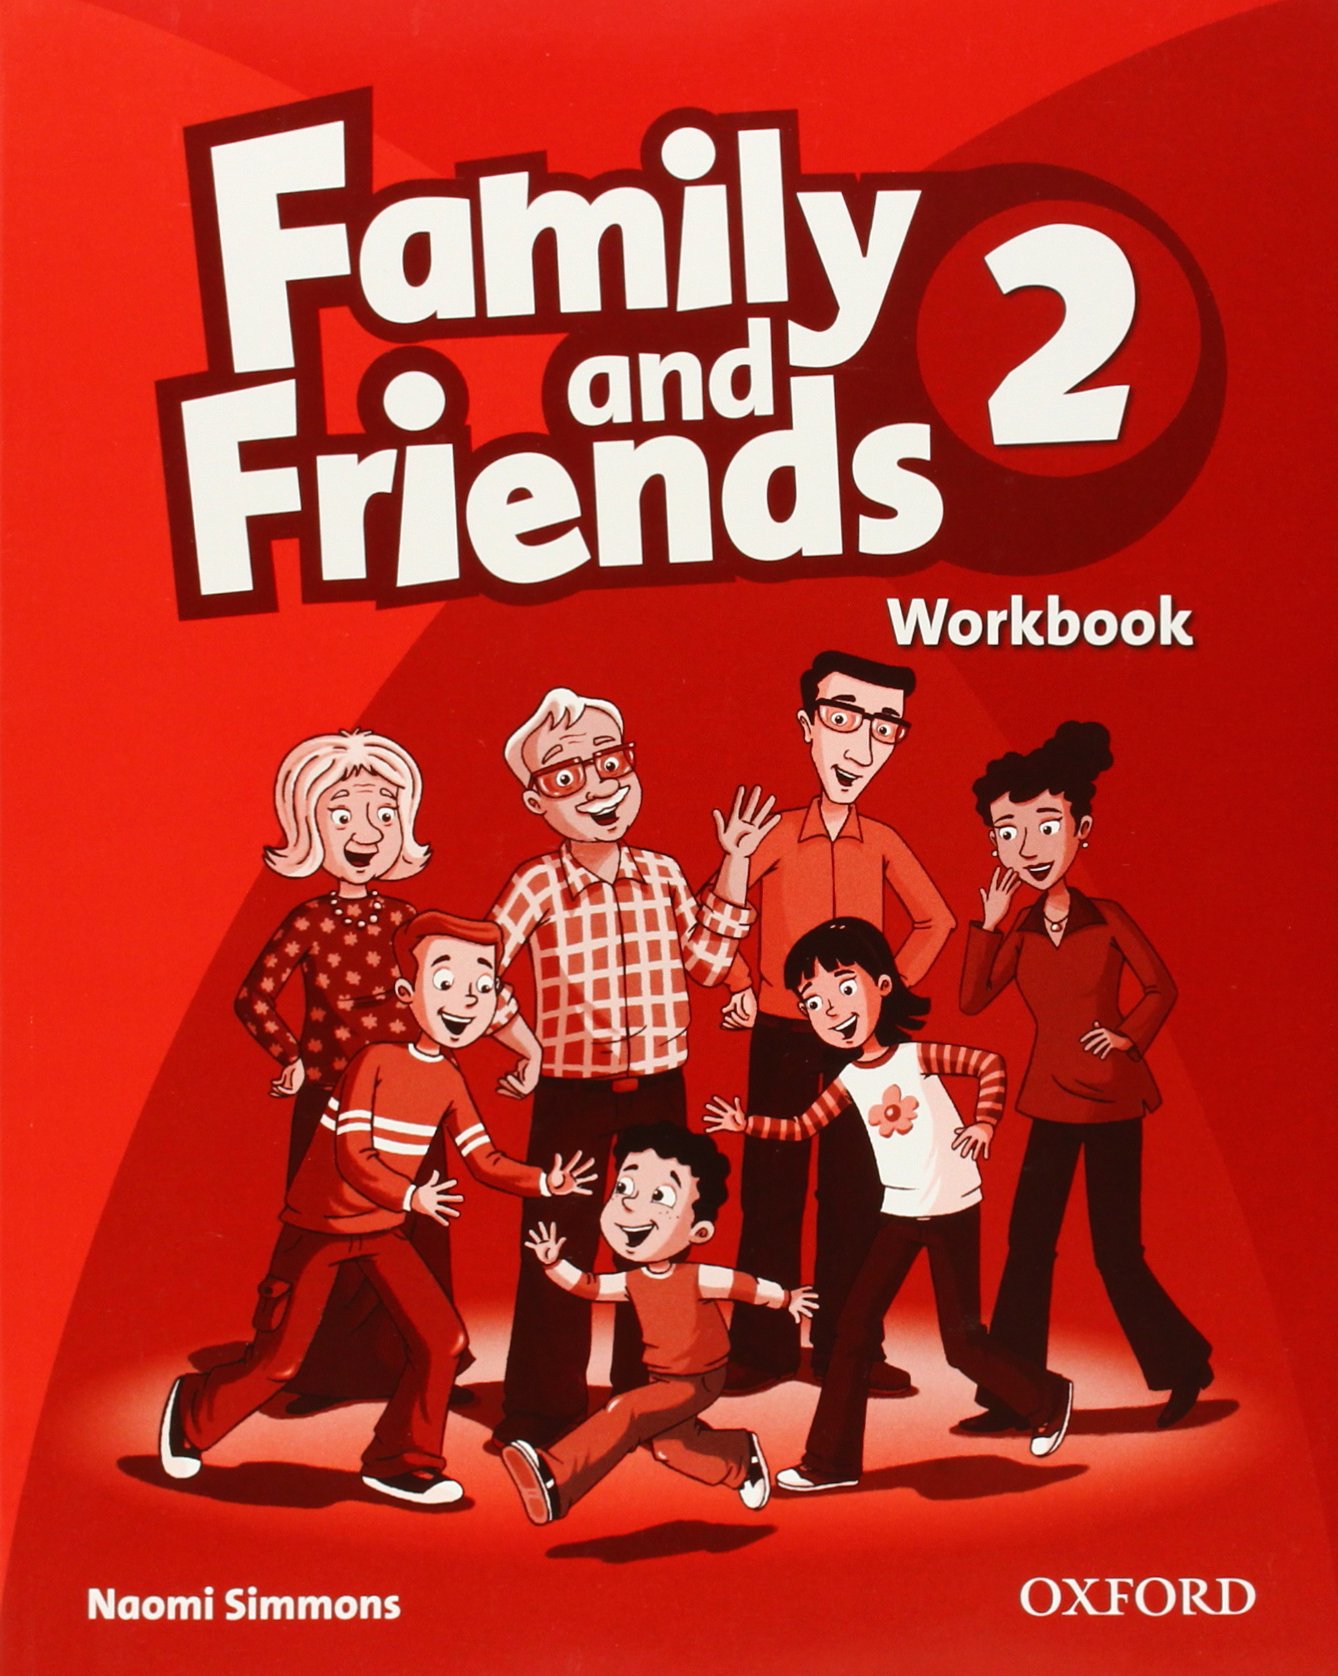 FAMILY AND FRIENDS 2 Workbook